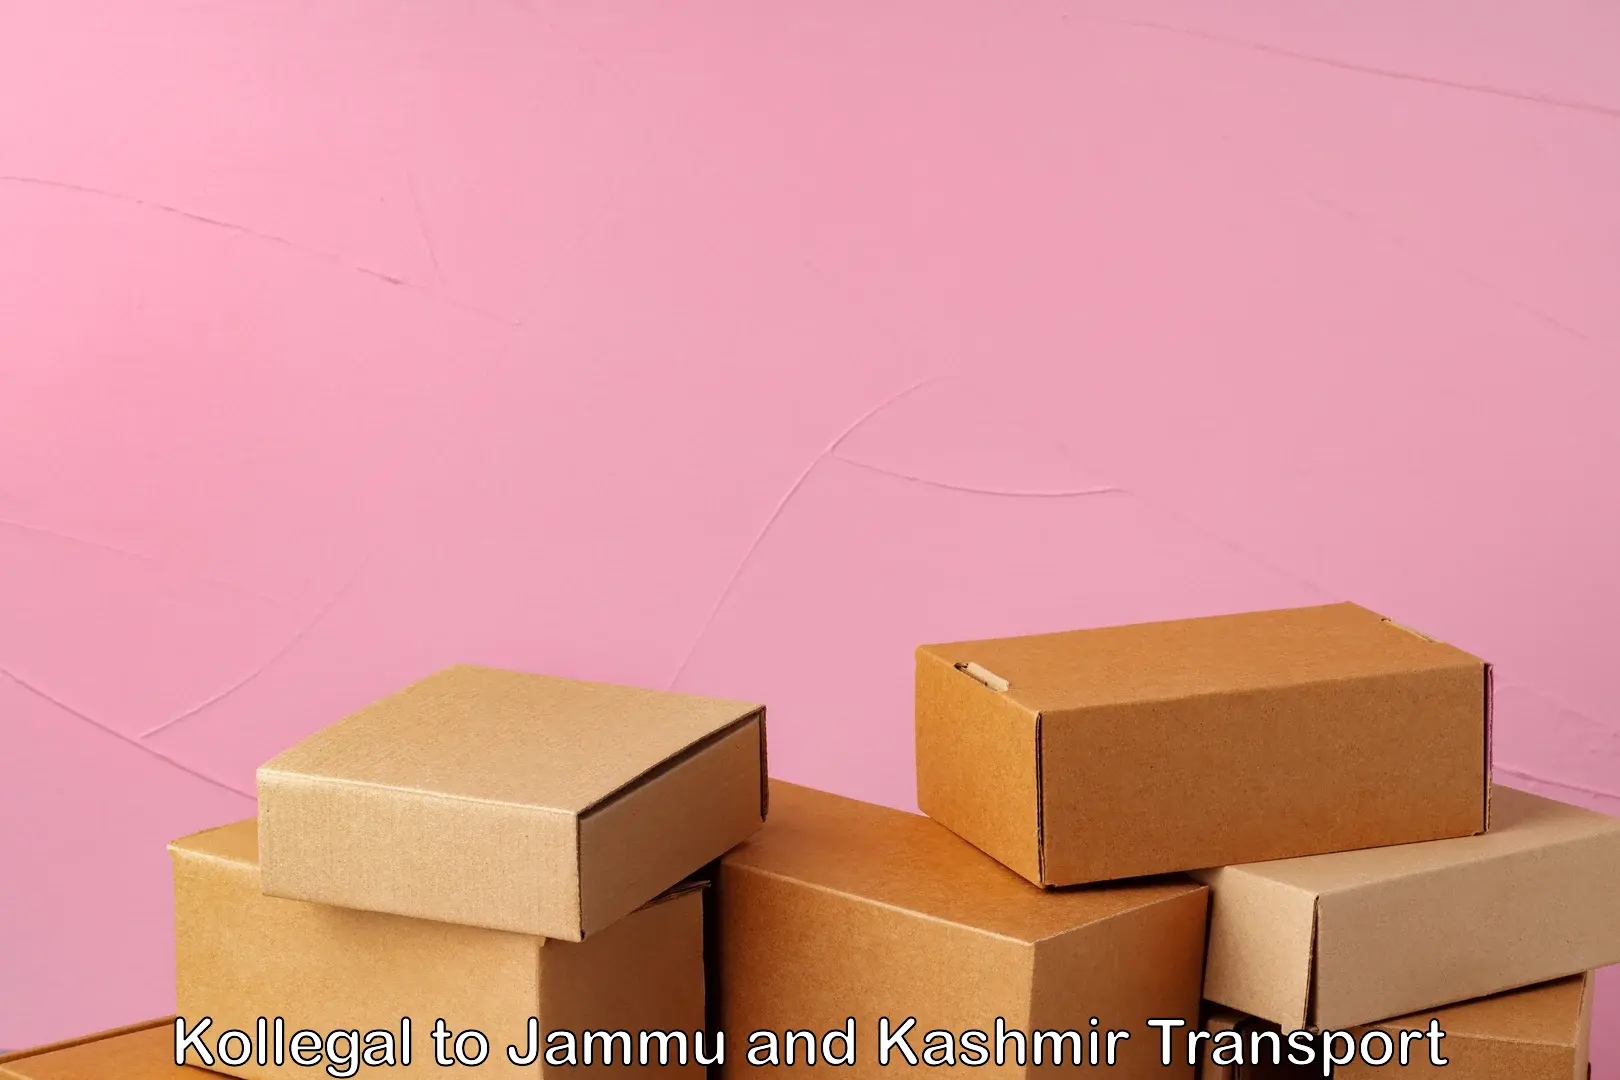 Shipping services Kollegal to Jammu and Kashmir